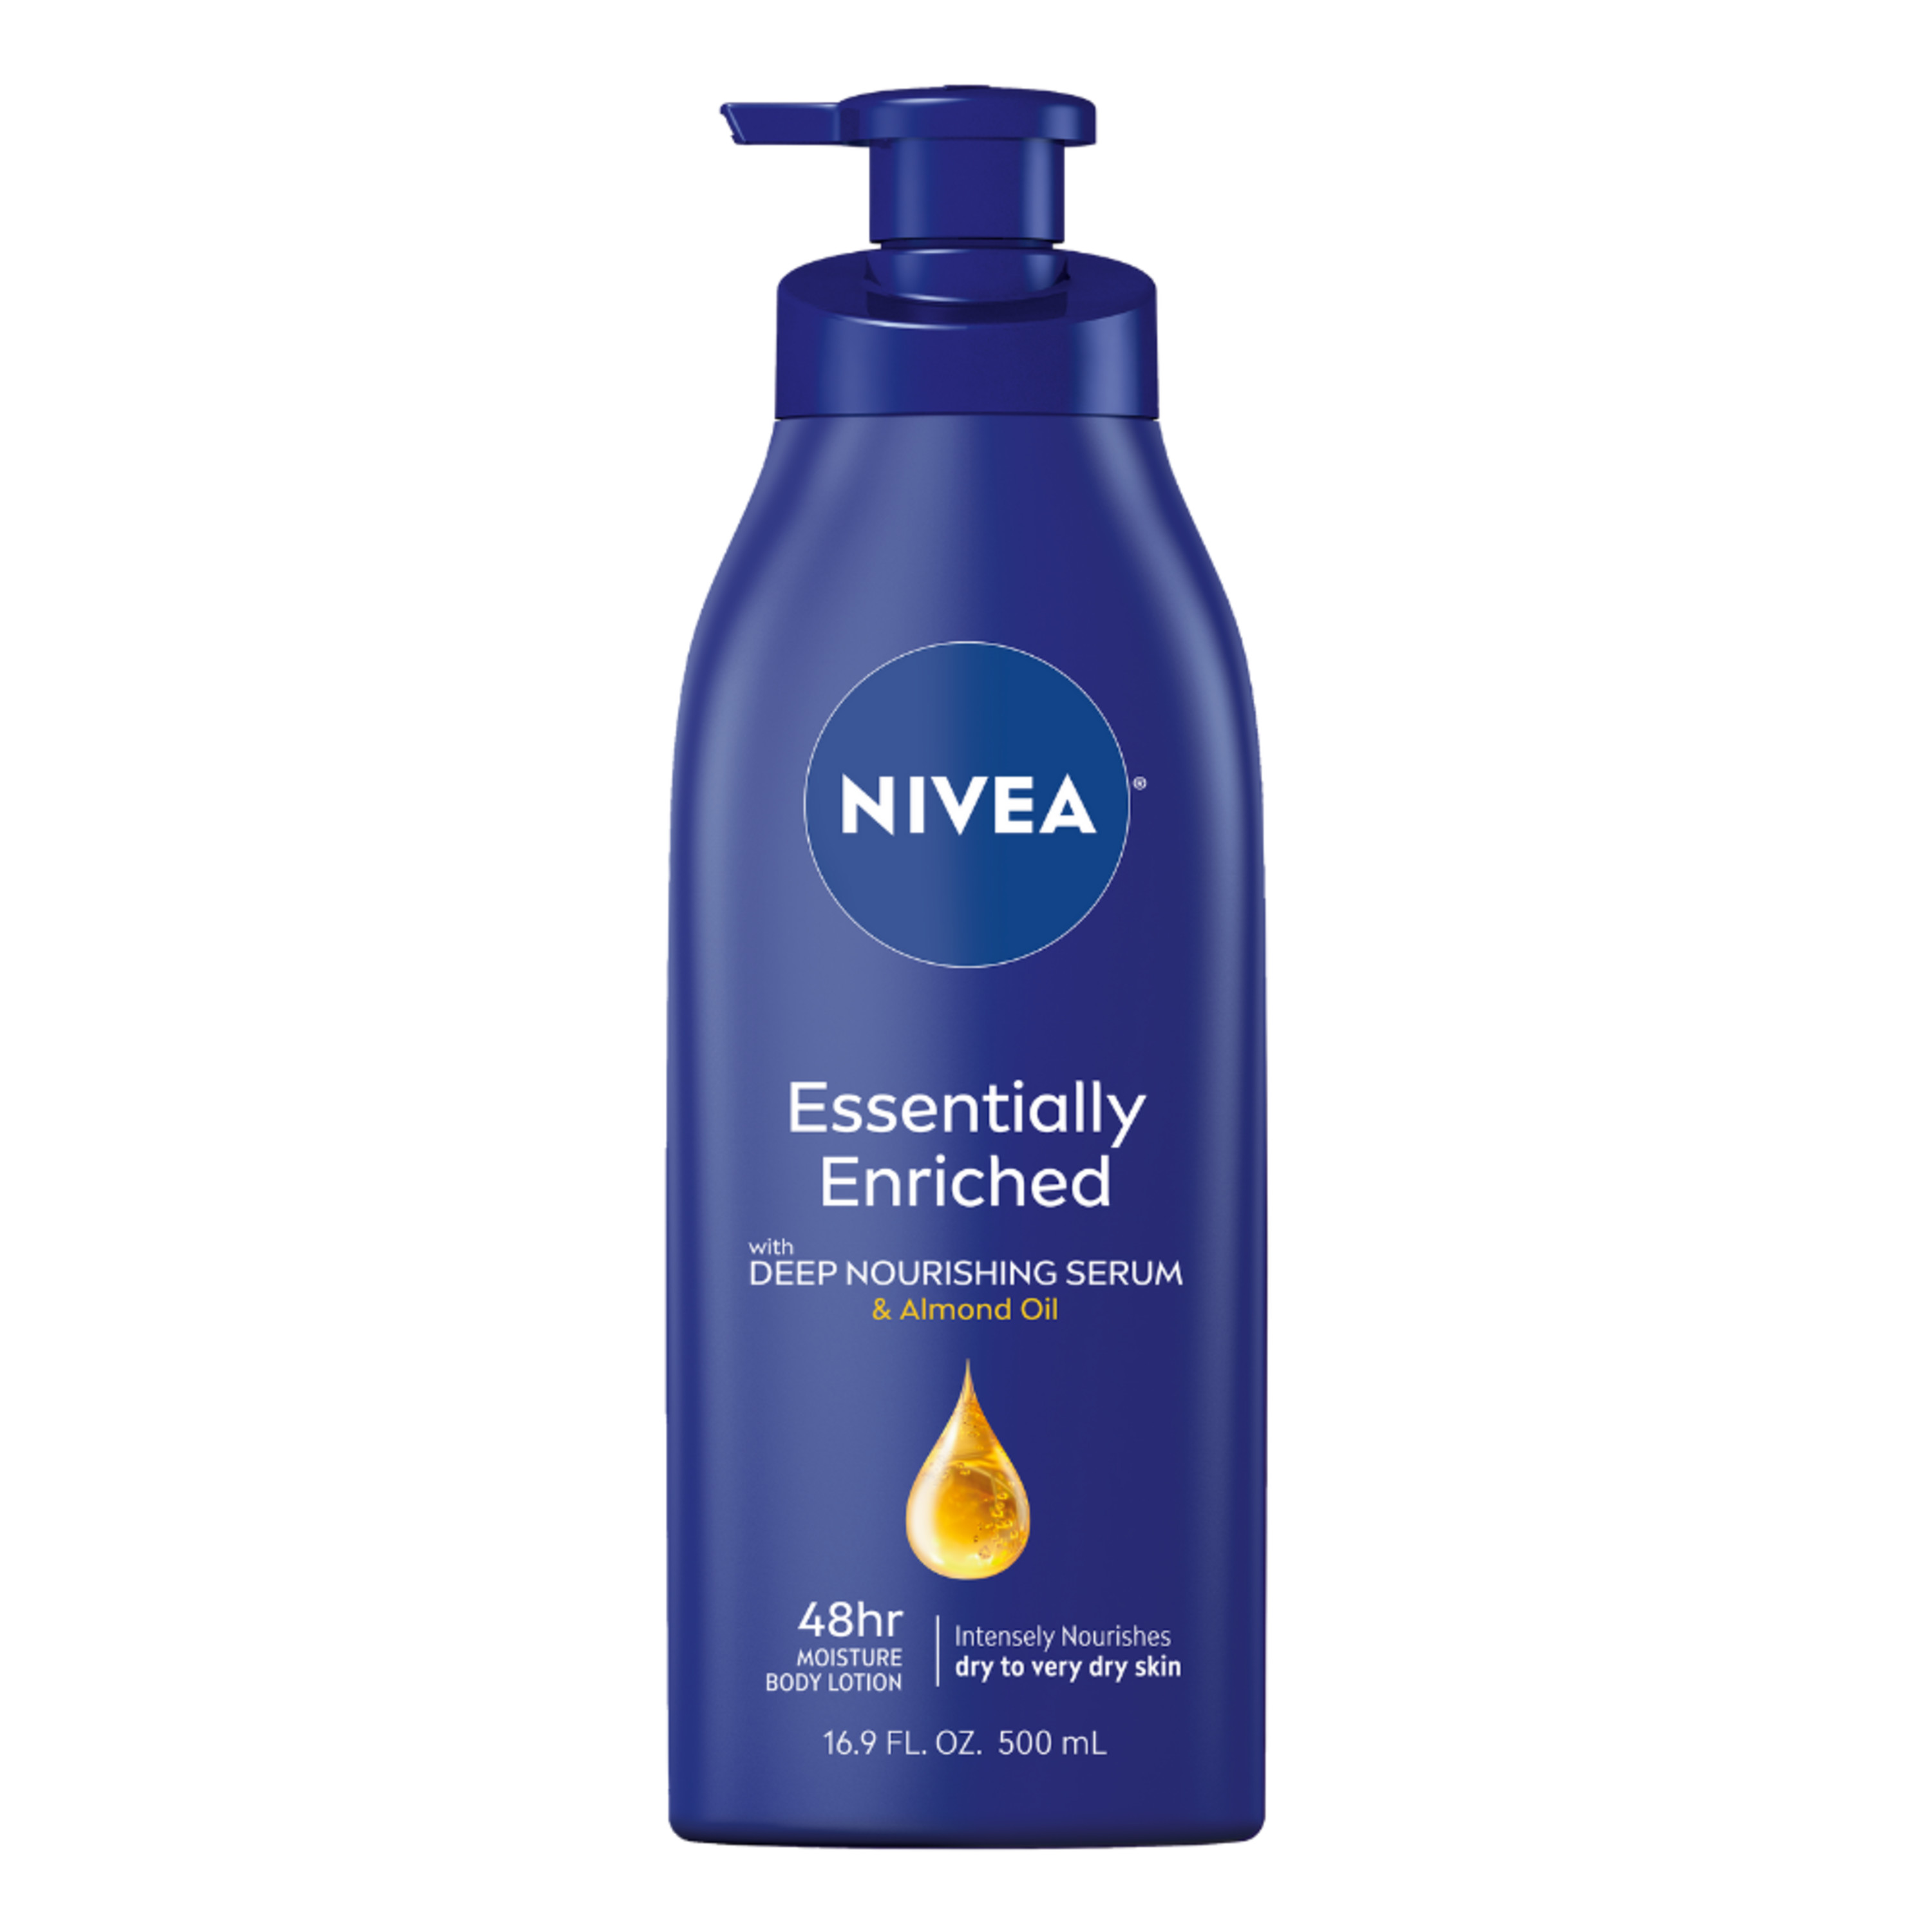 NIVEA Essentially Enriched Body Lotion for Dry Skin, 16.9 Fl Oz Pump Bottle - image 3 of 14